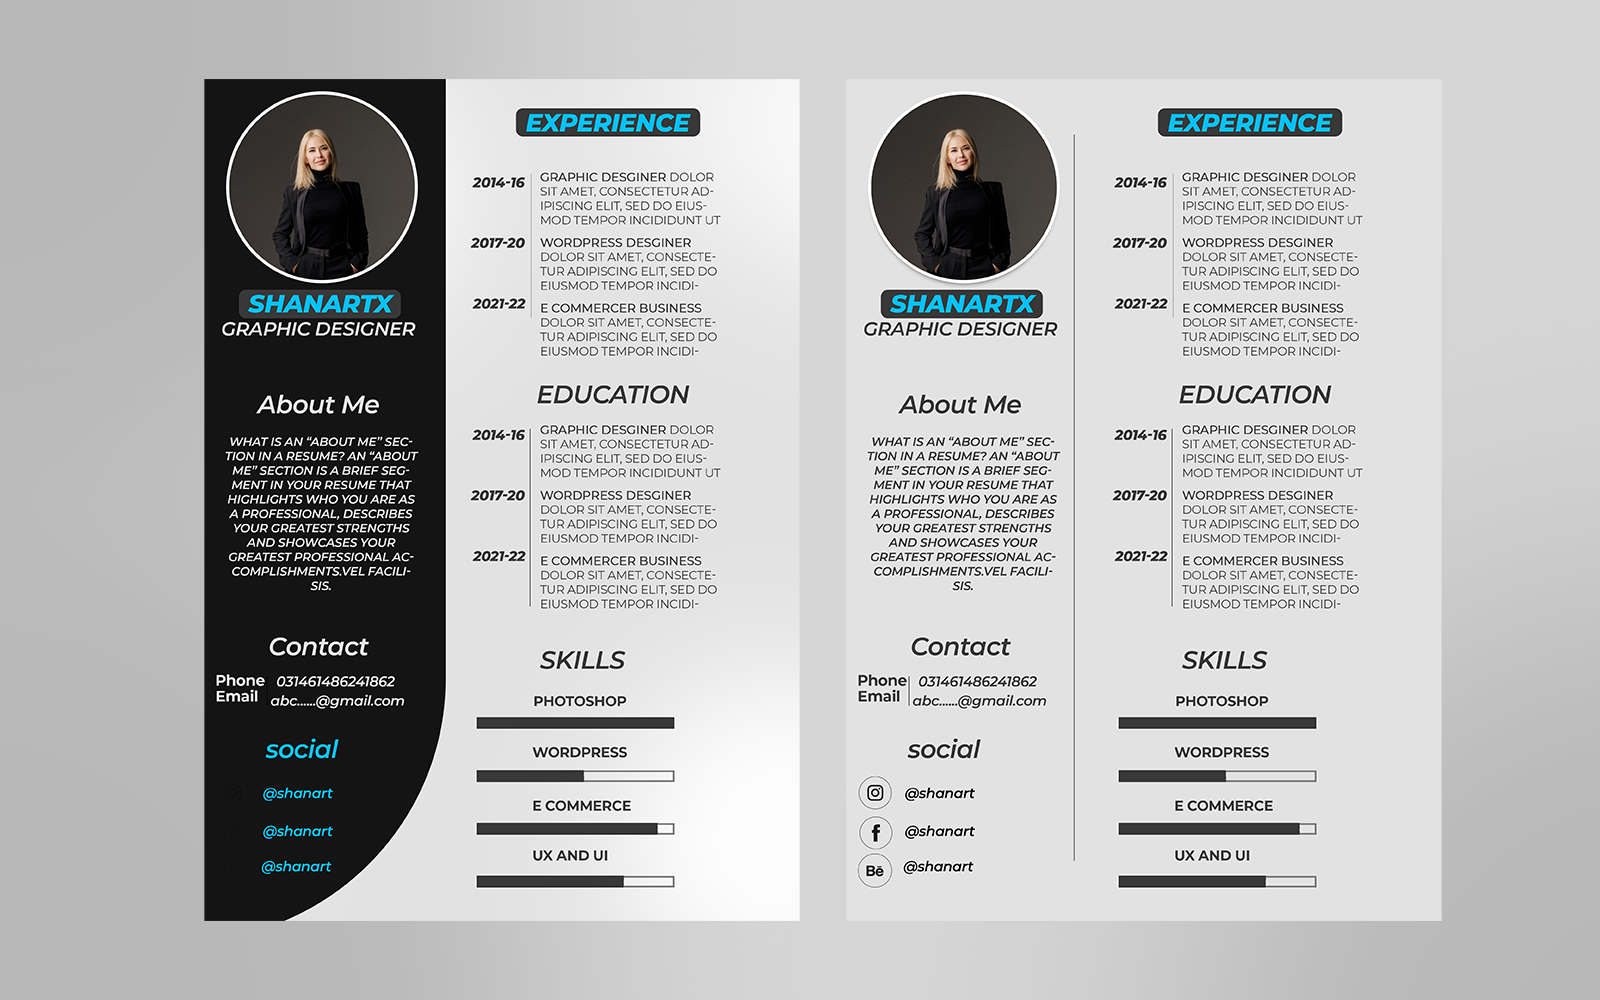 12x Design Professional Resume and Cover Letter Resume Resume and CV